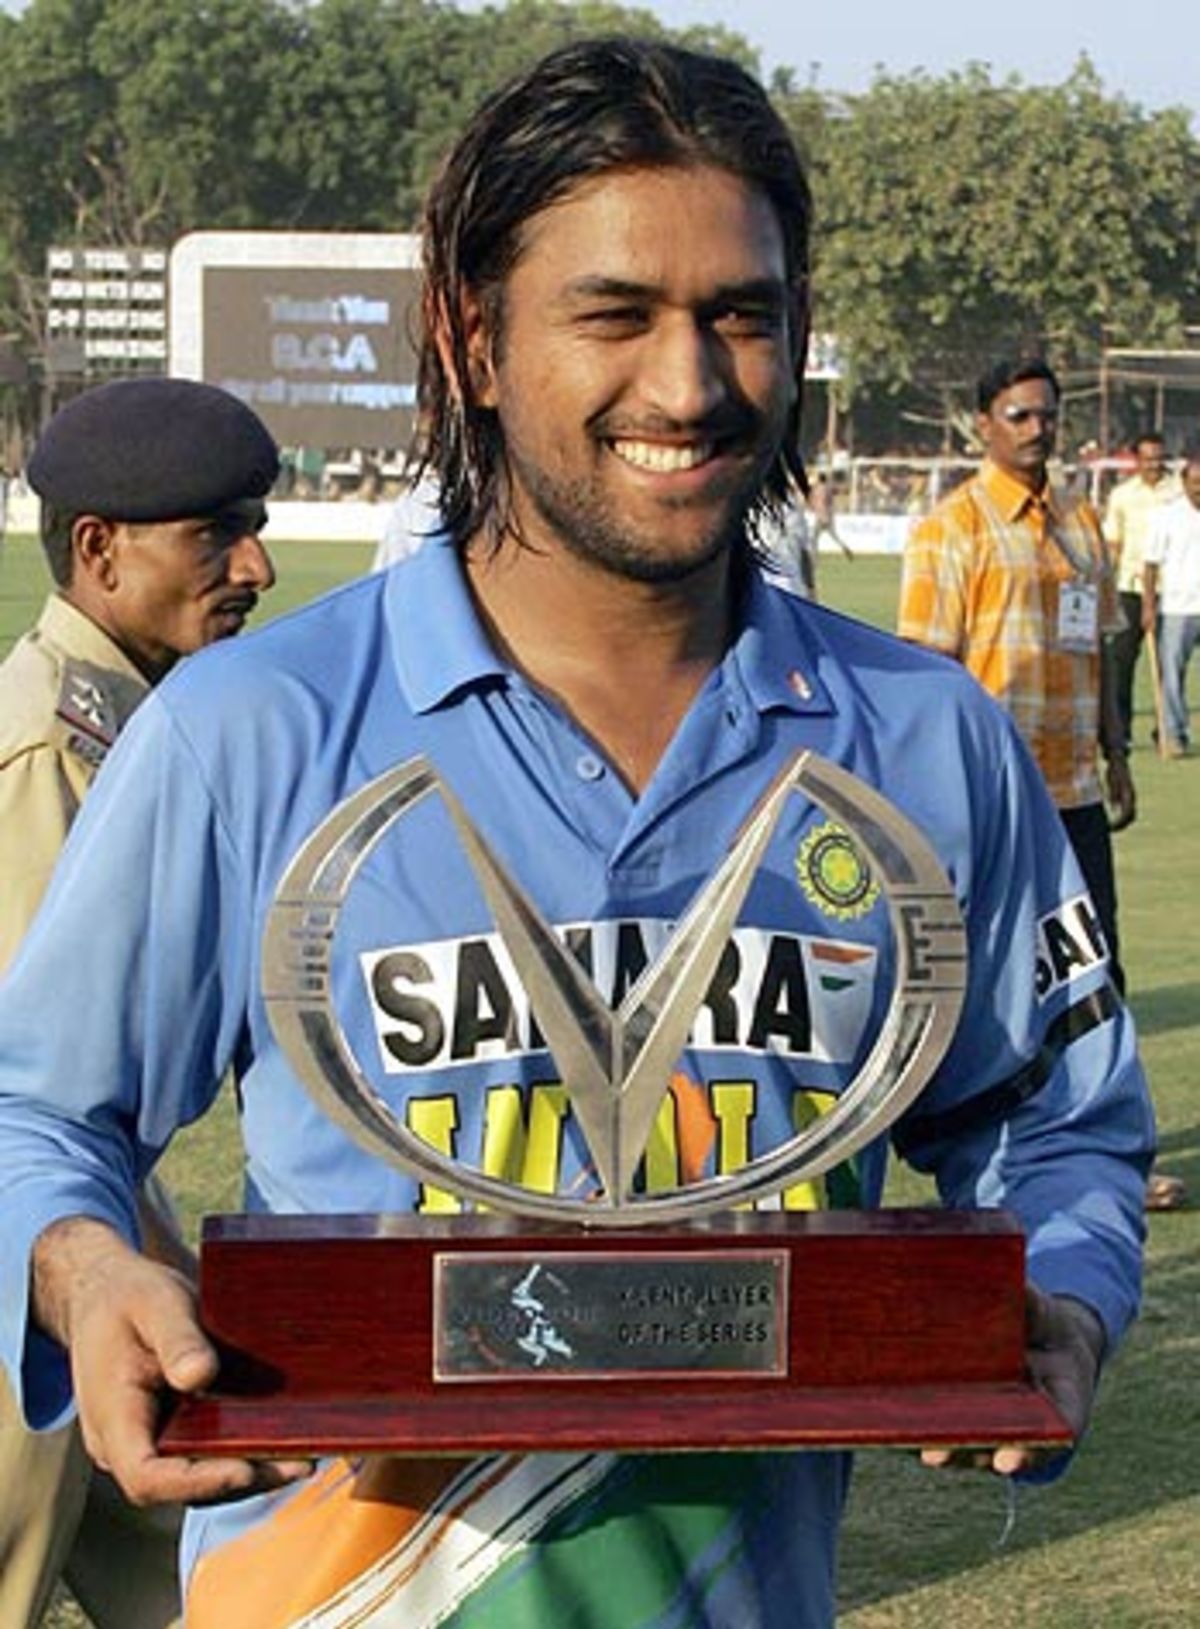 Mahendra Singh Dhoni S Heroics With Bat And Glove Earned Him The Man Of The Series Award